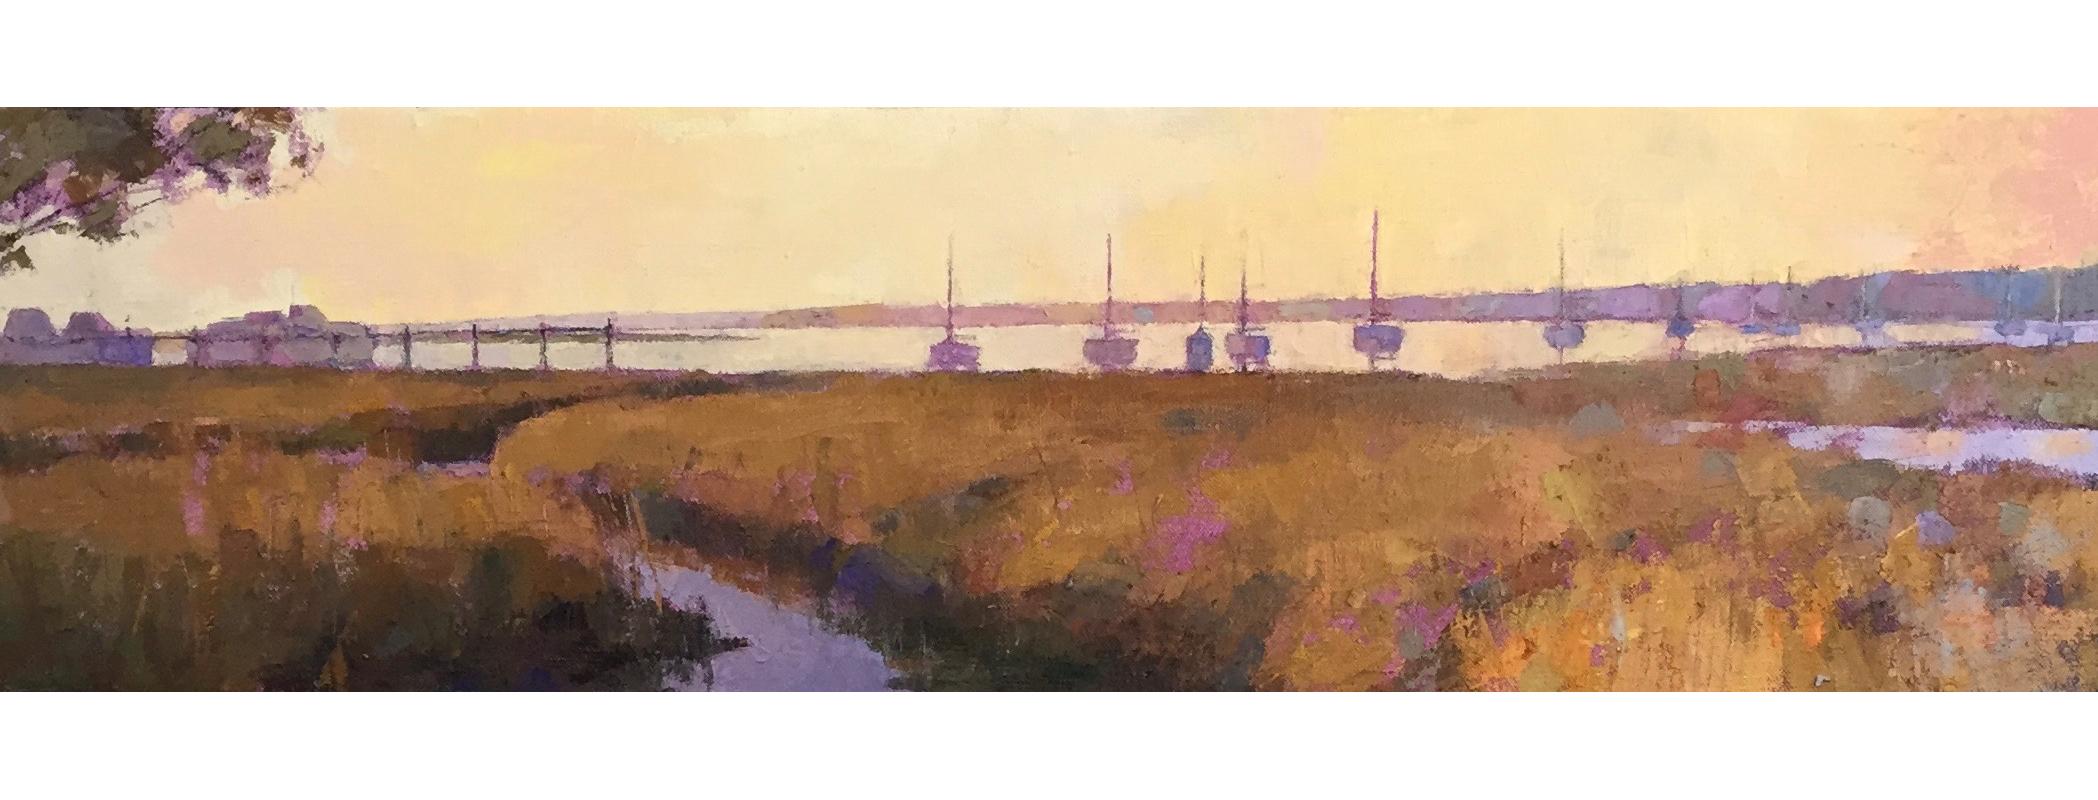 Larry Horowitz Landscape Painting - "Harbor in Amber" Panoramic oil painting of a marsh and boats at dusk